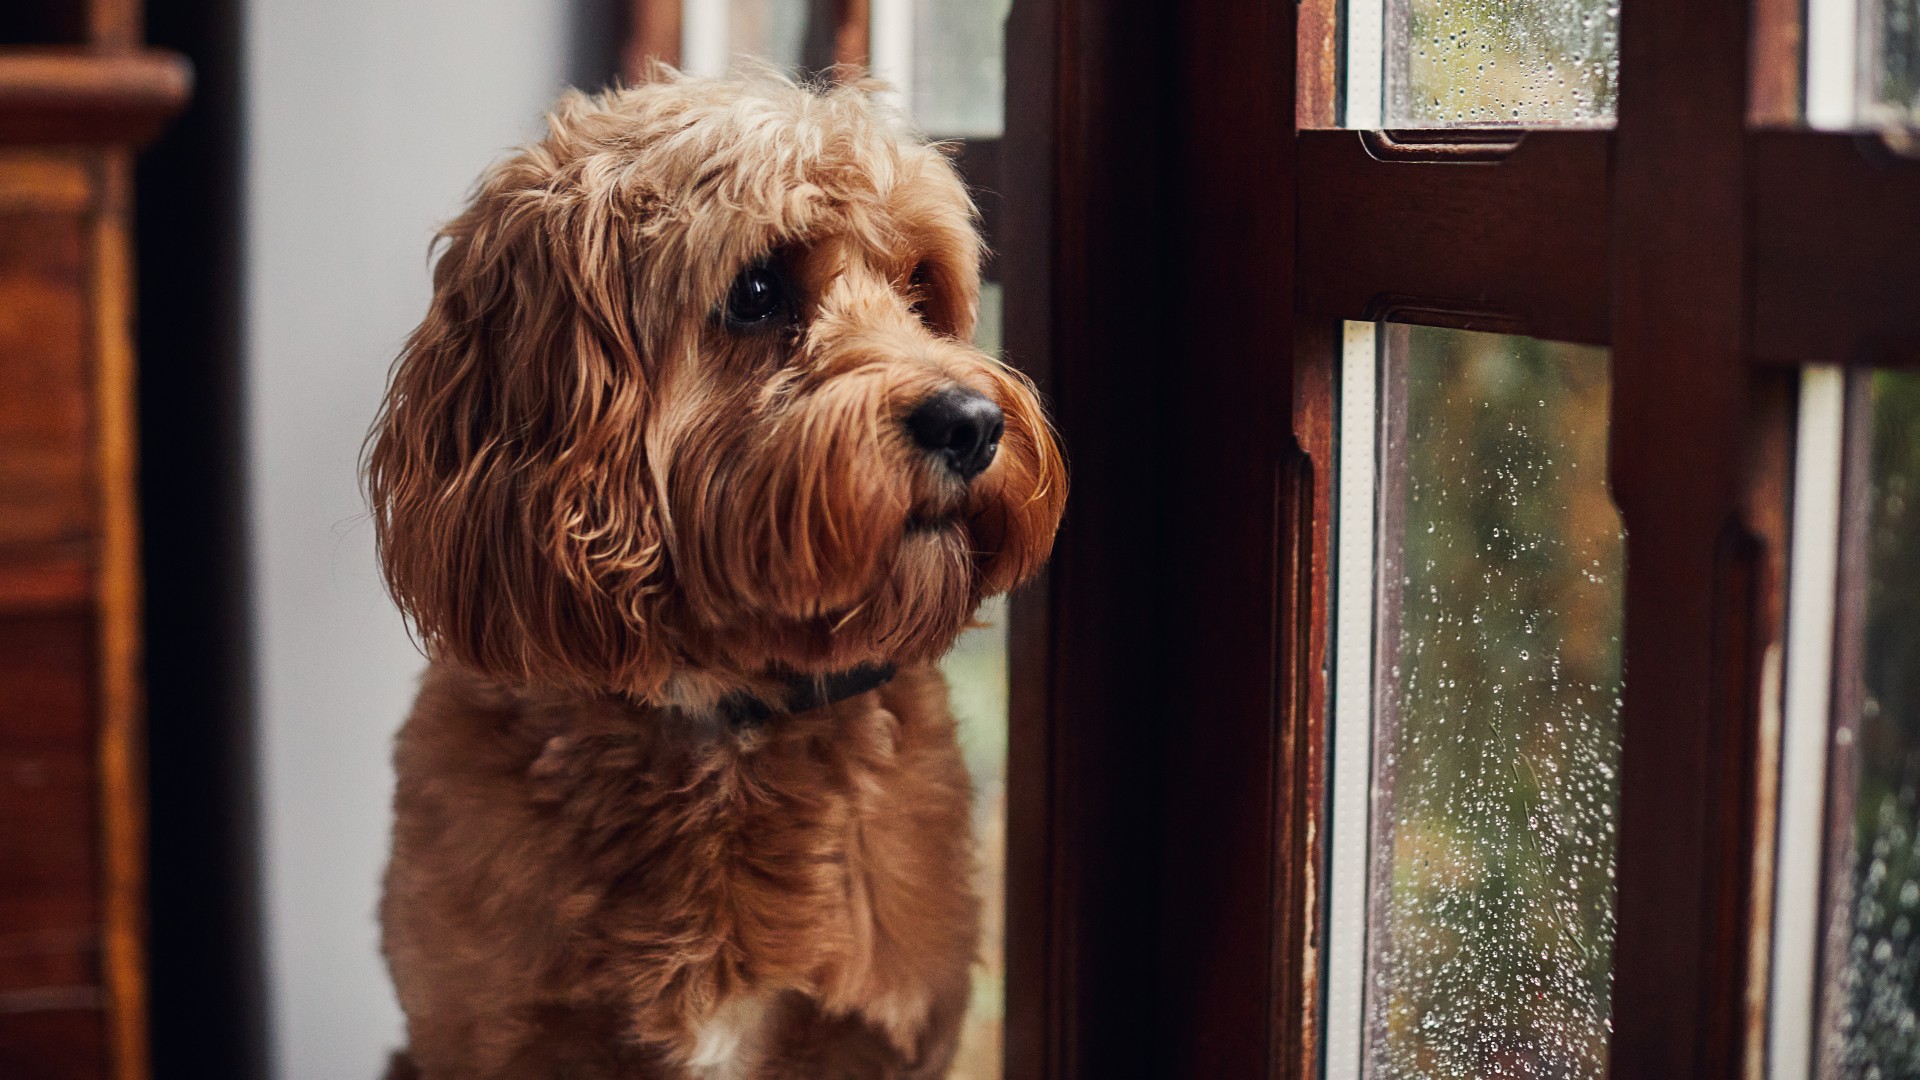 Back to work? This behaviorist's 6 tips could ease your dog's post-Christmas anxiety